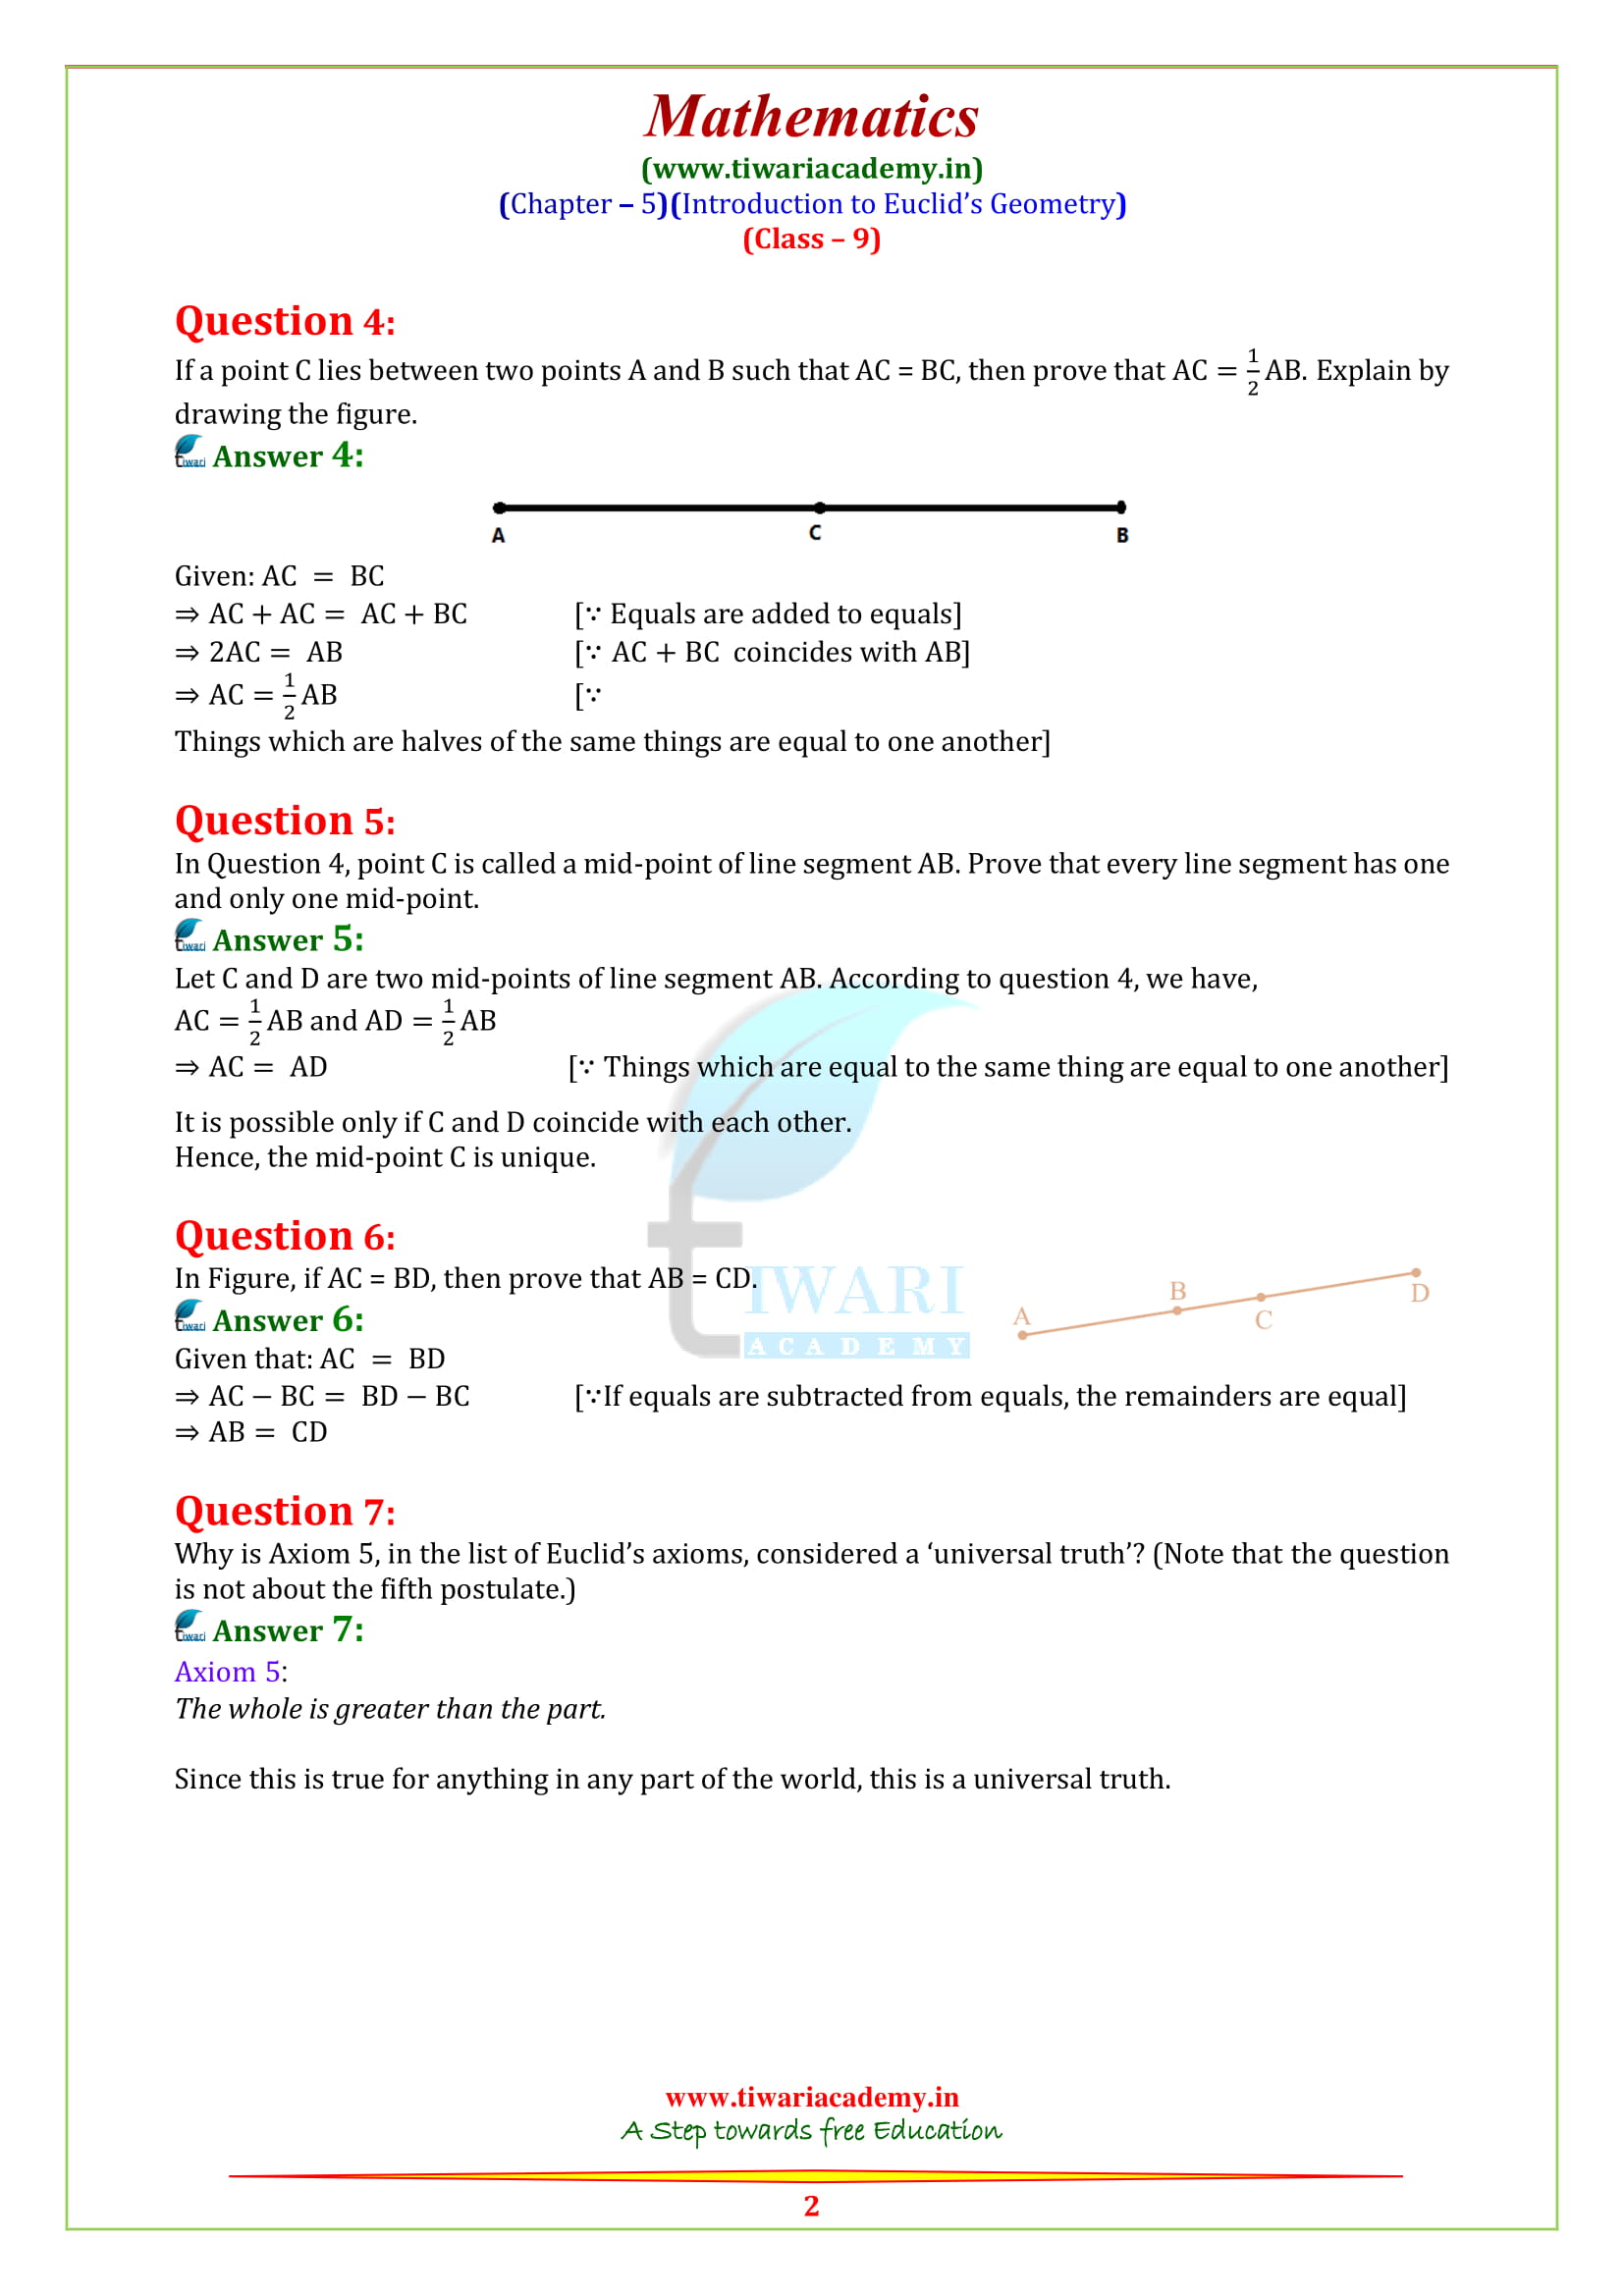 case study based questions class 9 maths chapter 5